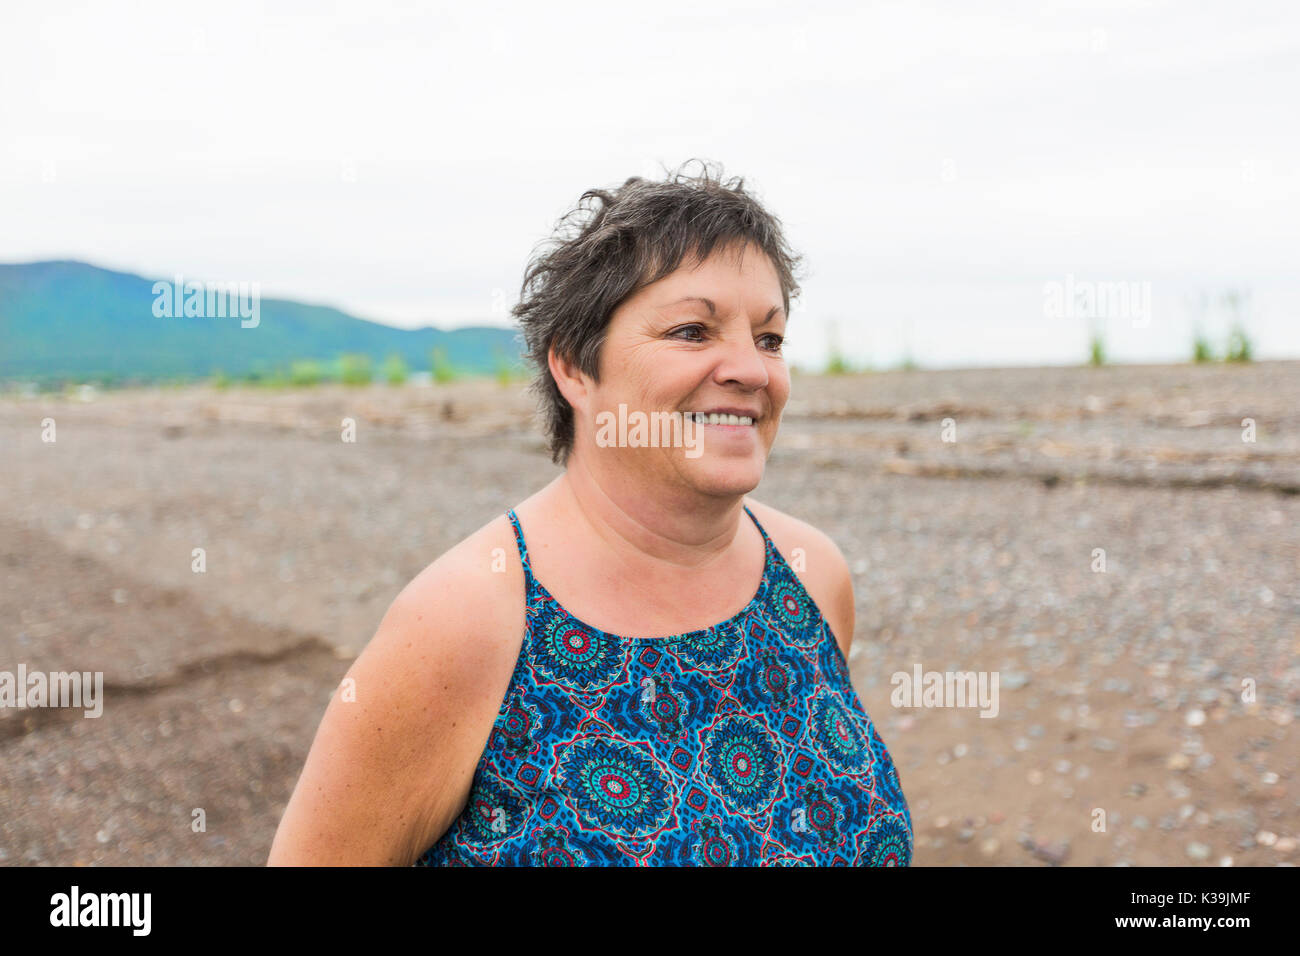 Middle aged woman portrait on the beach Stock Photo